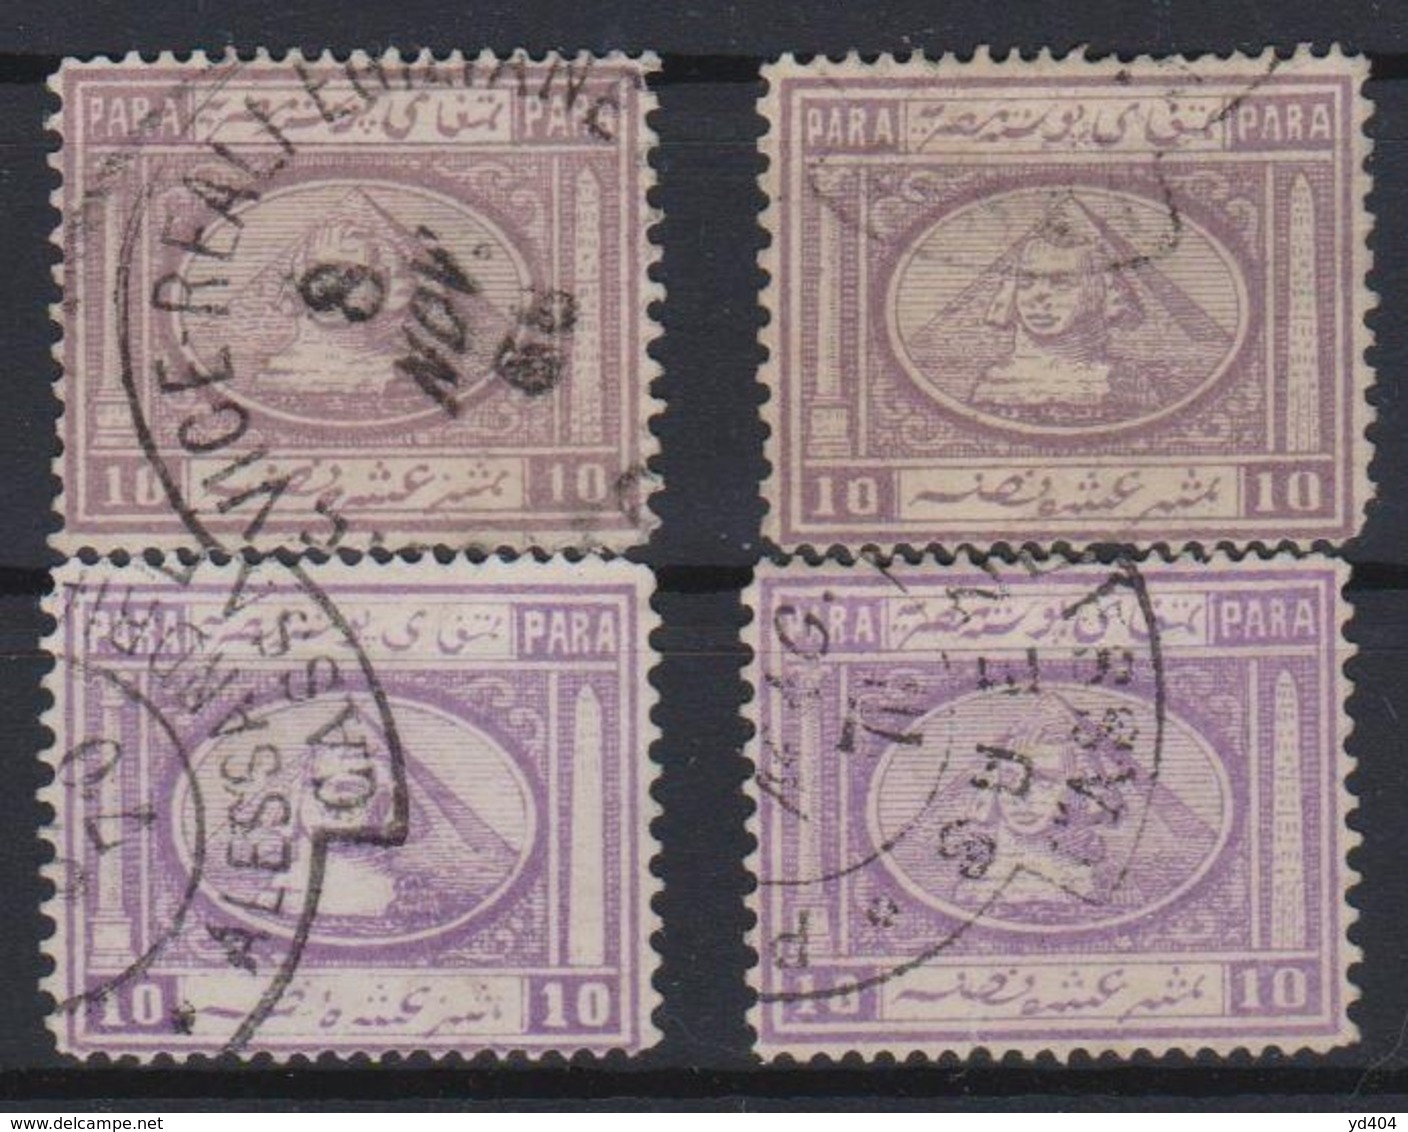 E010 – EGYPTE – EGYPT – 1867 - SECOND ISSUE – SPHINX & PYRAMID / 4 TYPES - Y&T # 9 (x4) USED 60 € - 1866-1914 Khedivaat Egypte